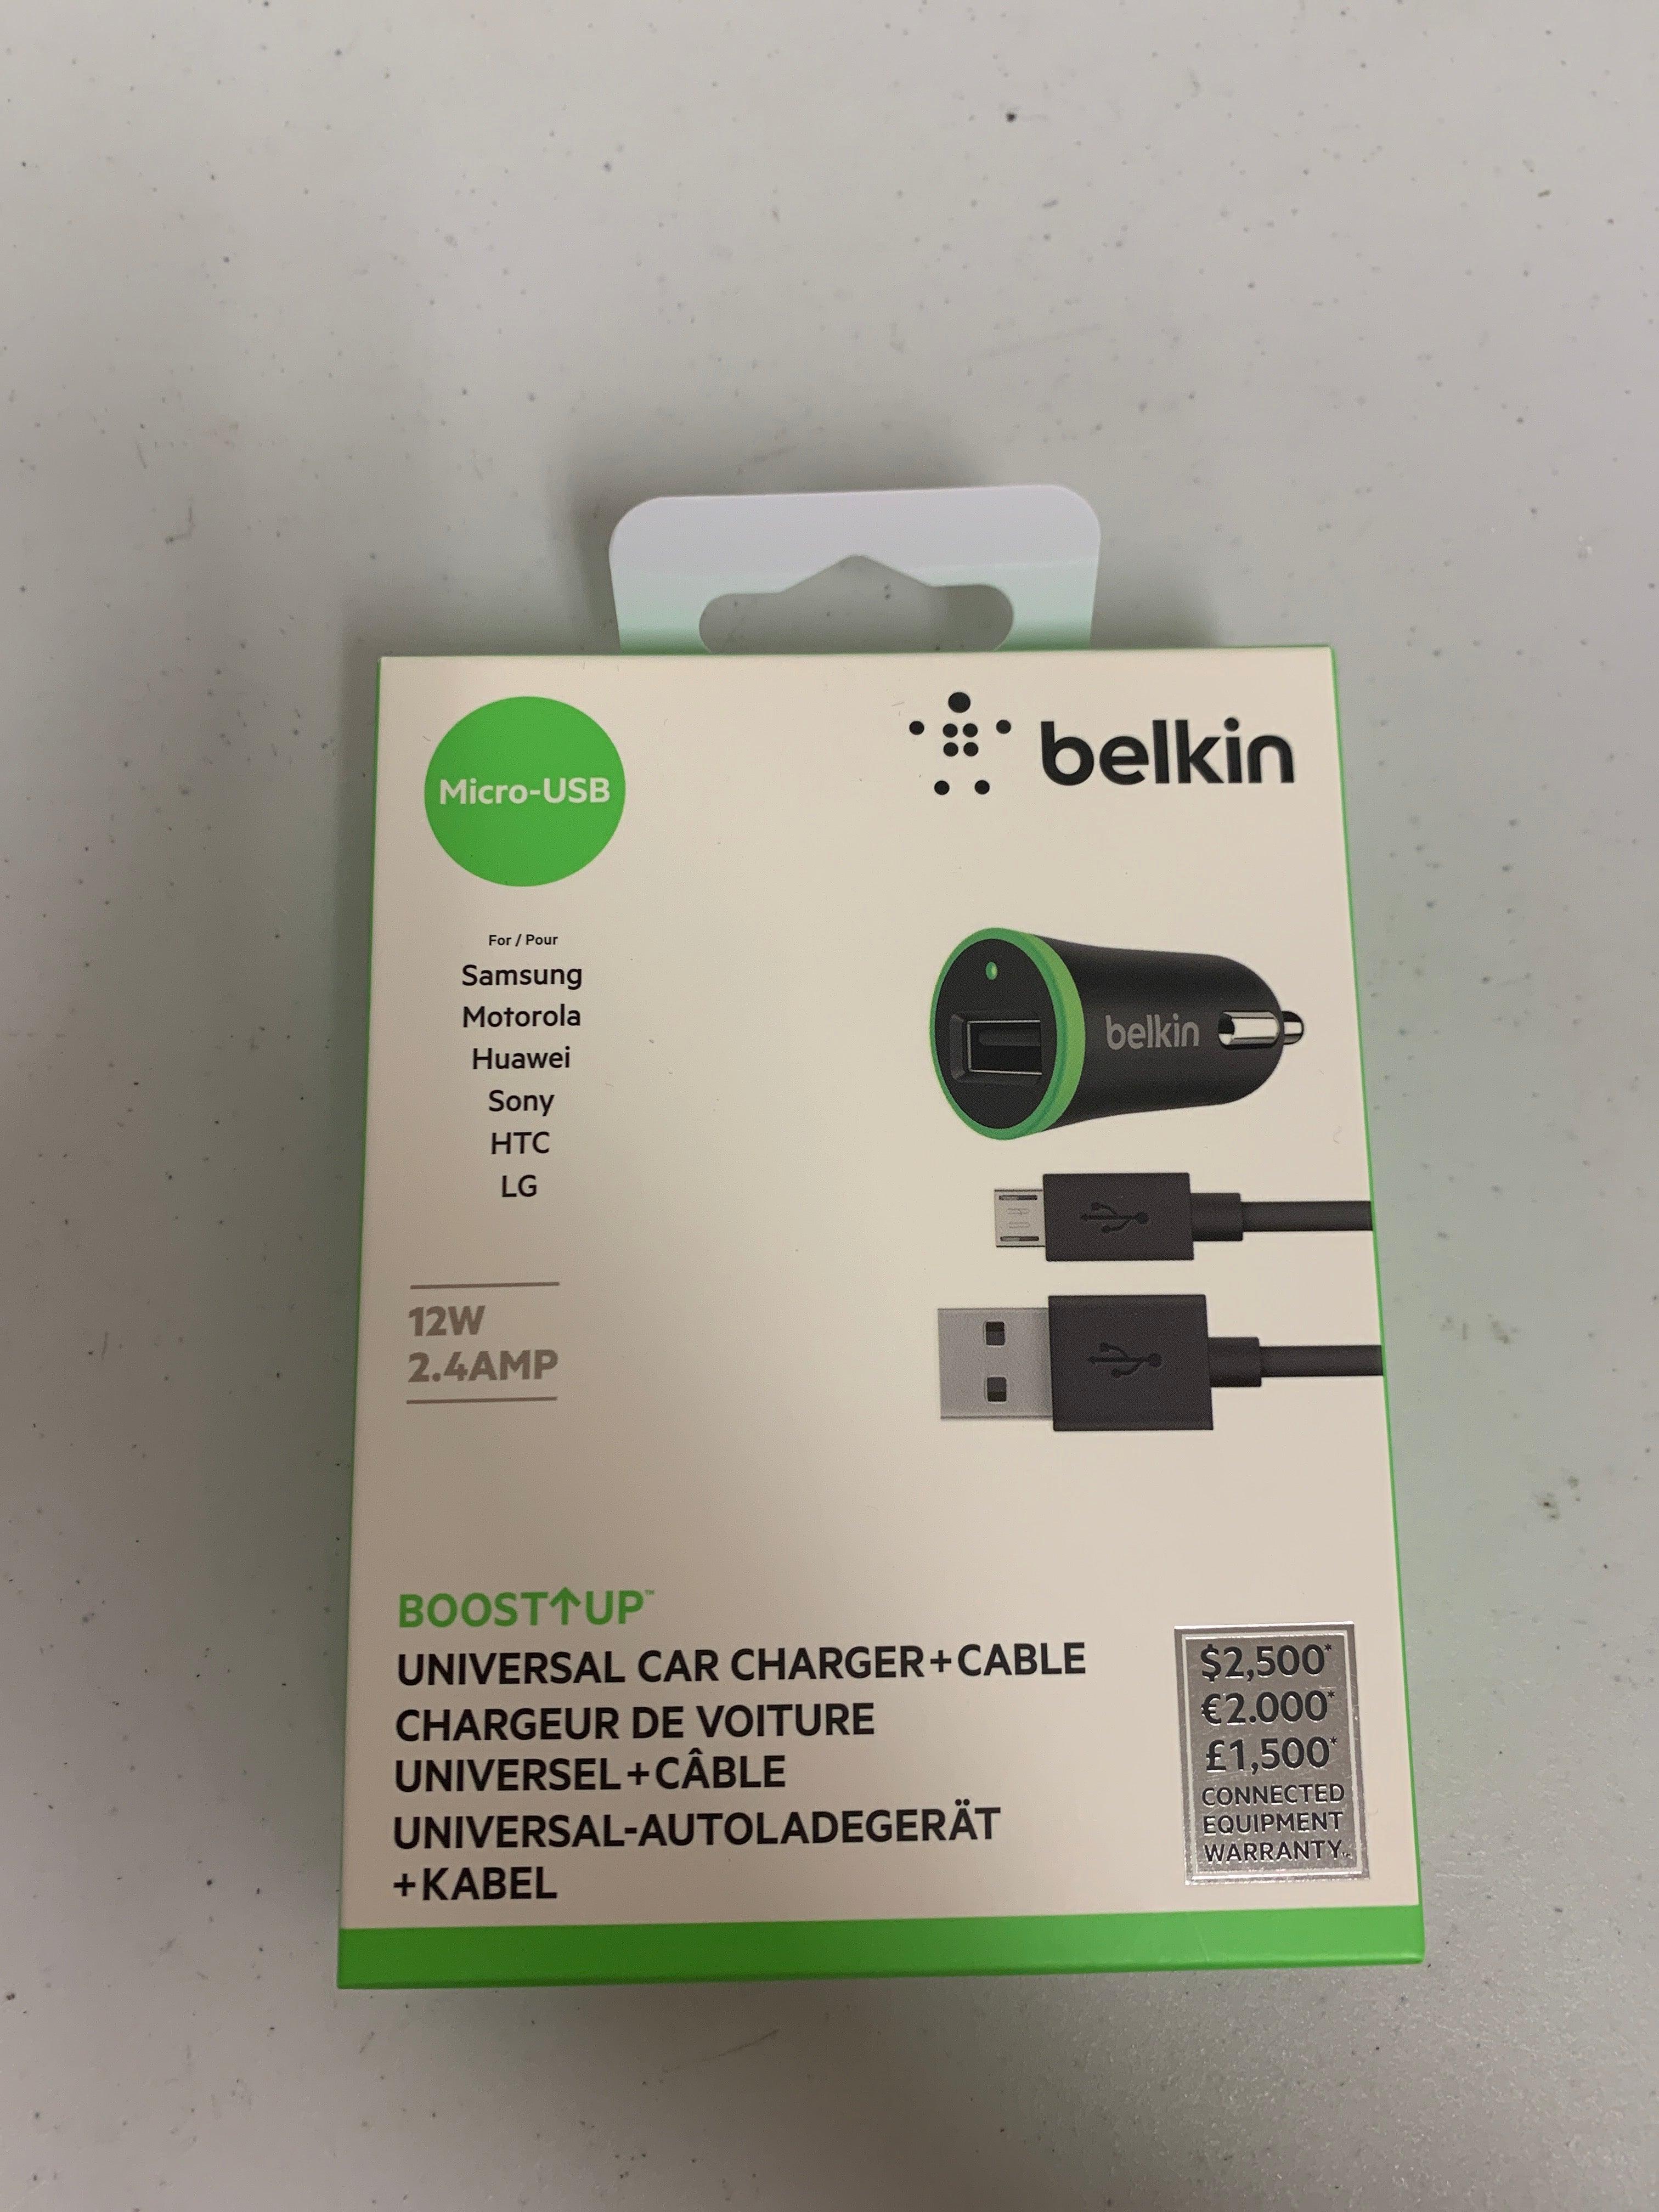 Belkin Boost Up Universal Car Charger + Cable Micro-USB 2.4AMP - New